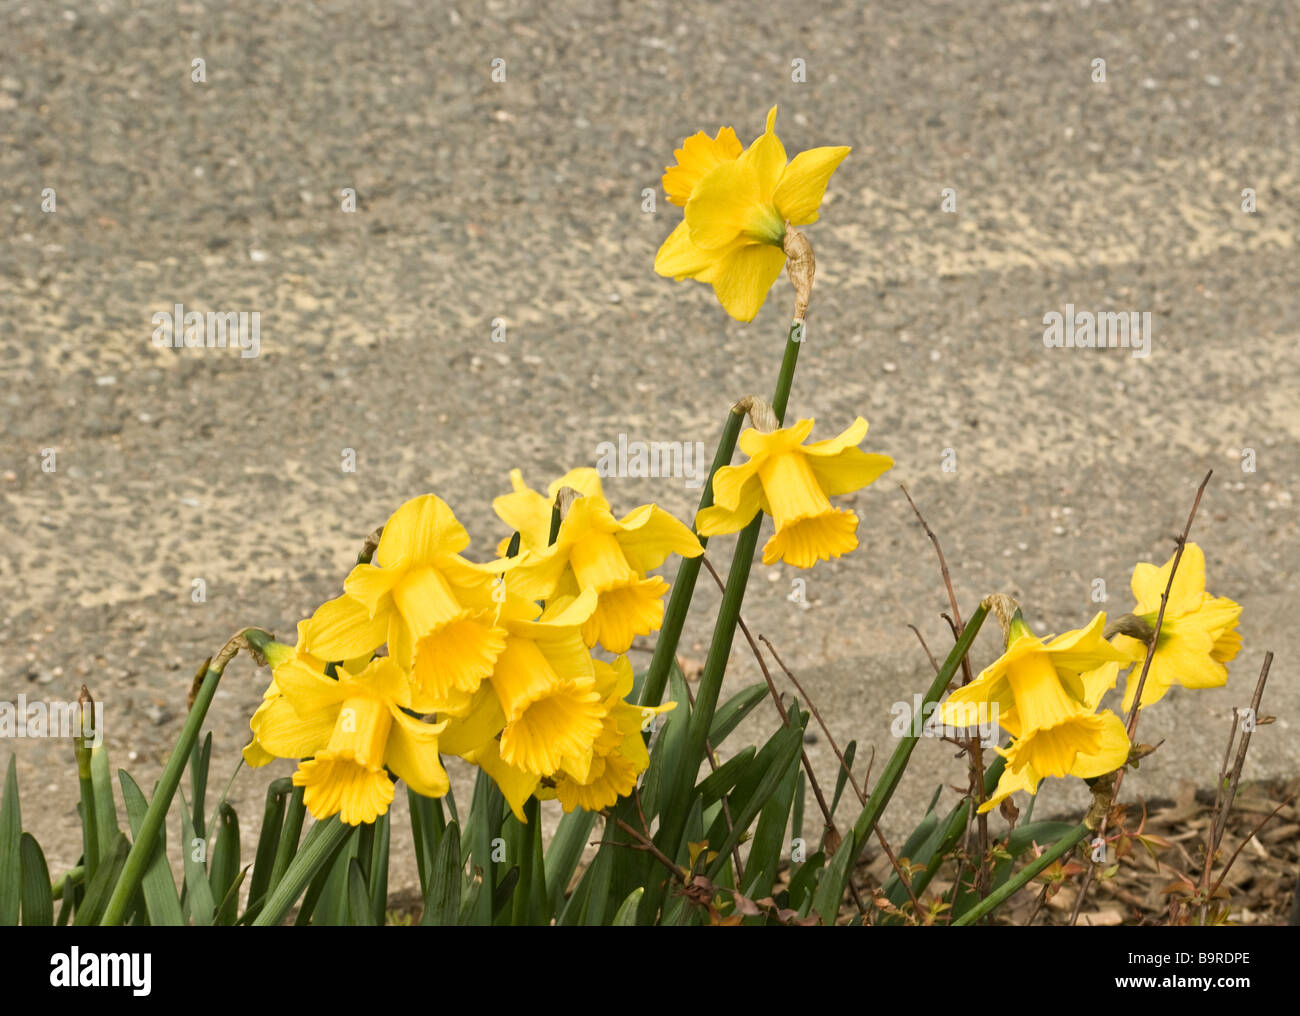 Roadside daffodils in North London outshine regulatory yellow lines on  road. Stock Photo